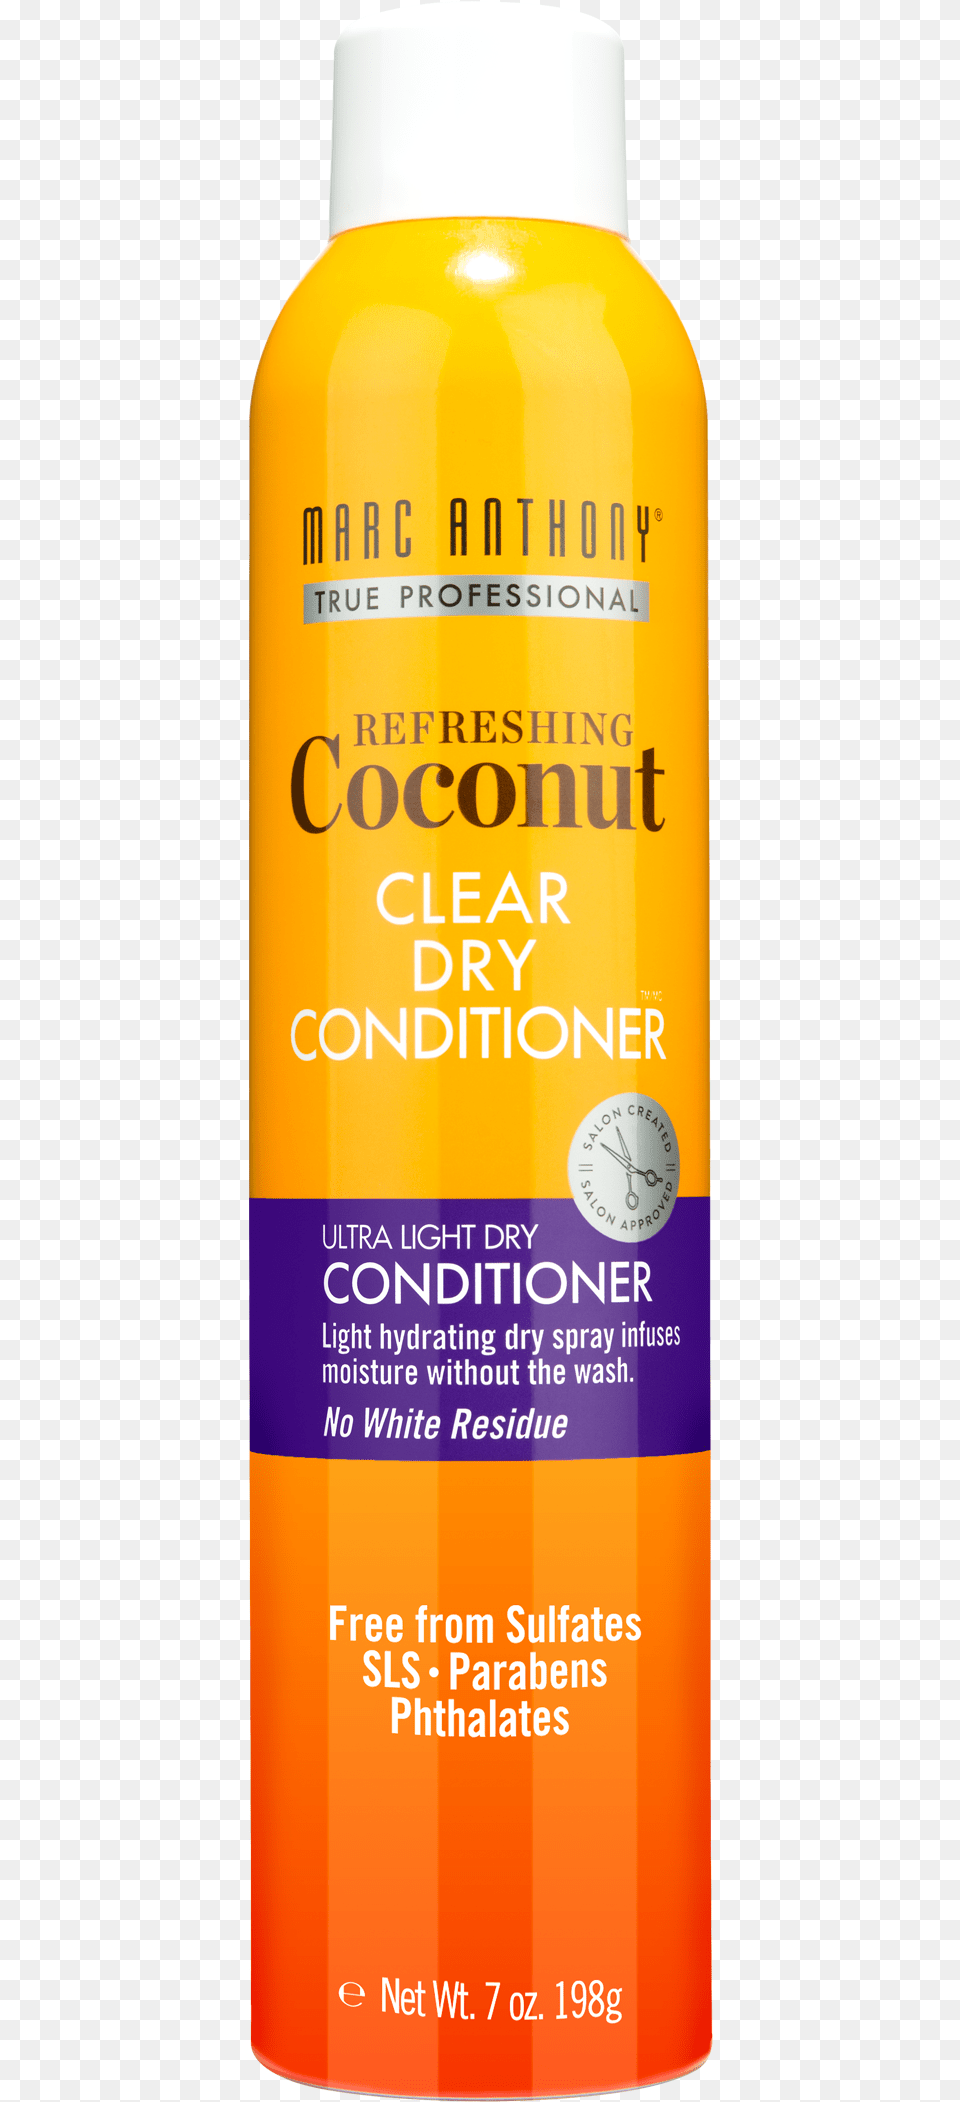 Marc Anthony Refreshing Coconut Clear Dry Shampoo, Bottle, Cosmetics, Sunscreen, Perfume Free Transparent Png